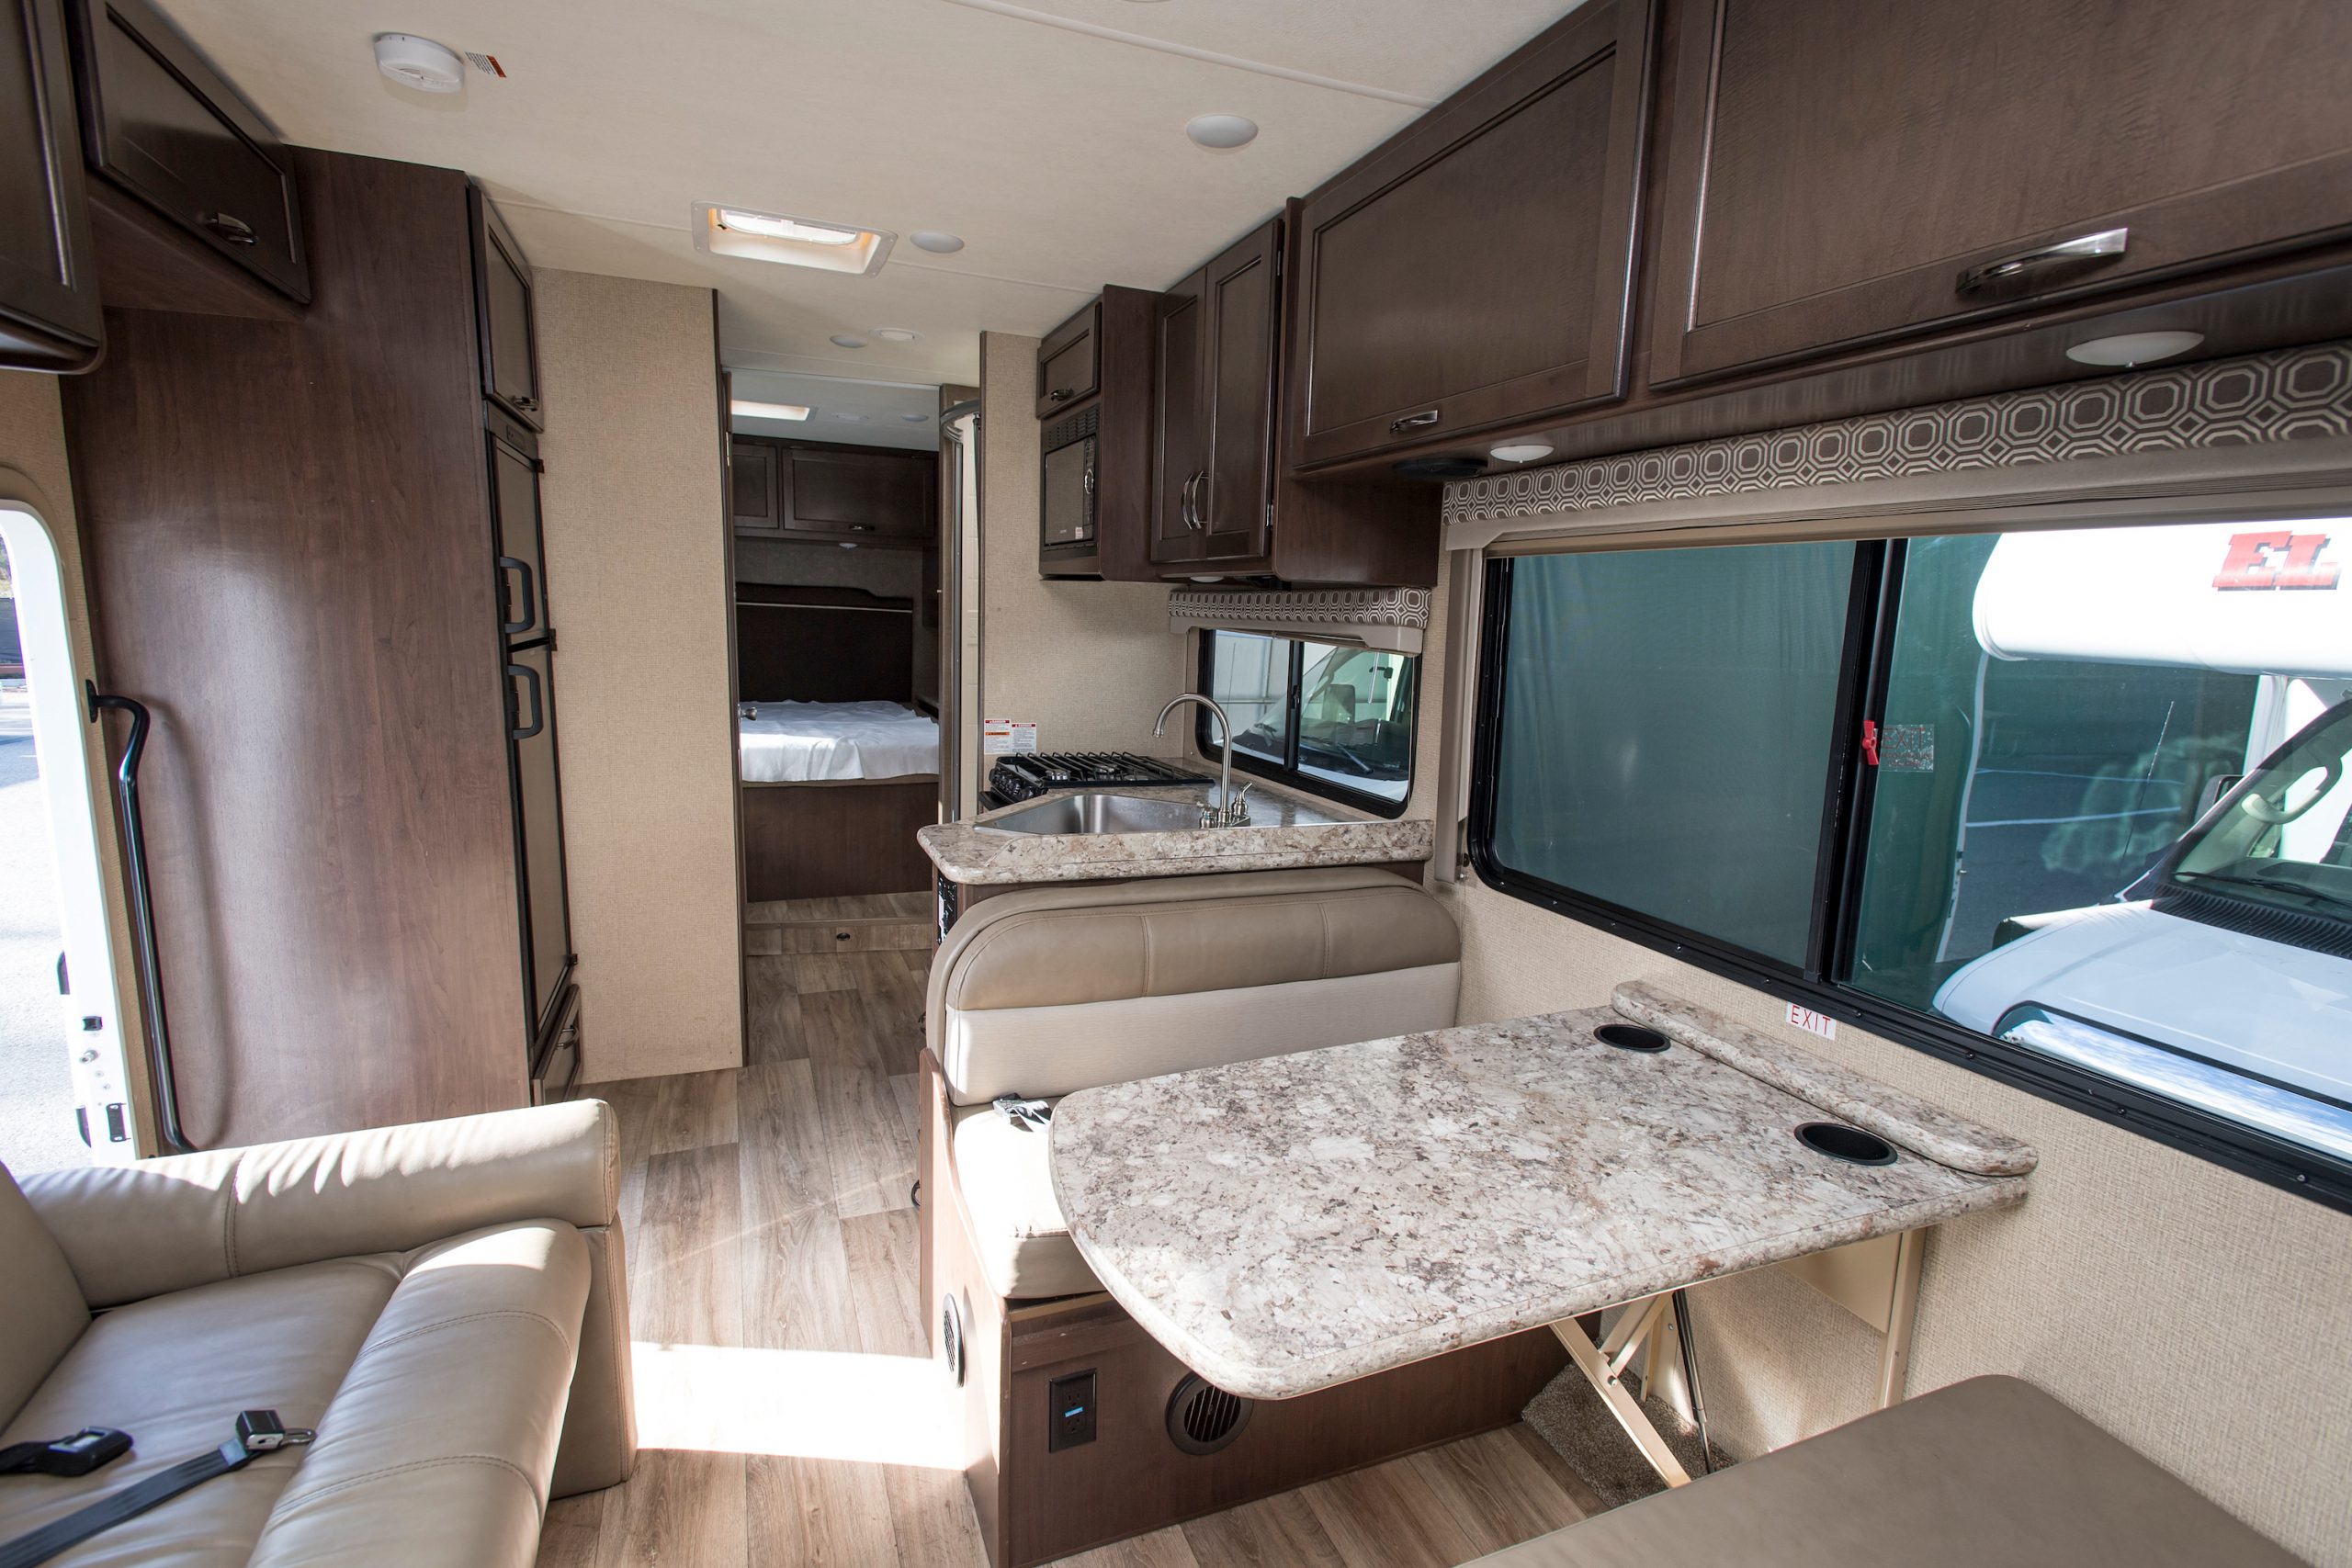 The interior of a Four Winds Class C motorhome is seen in the Presidio in San Francisco